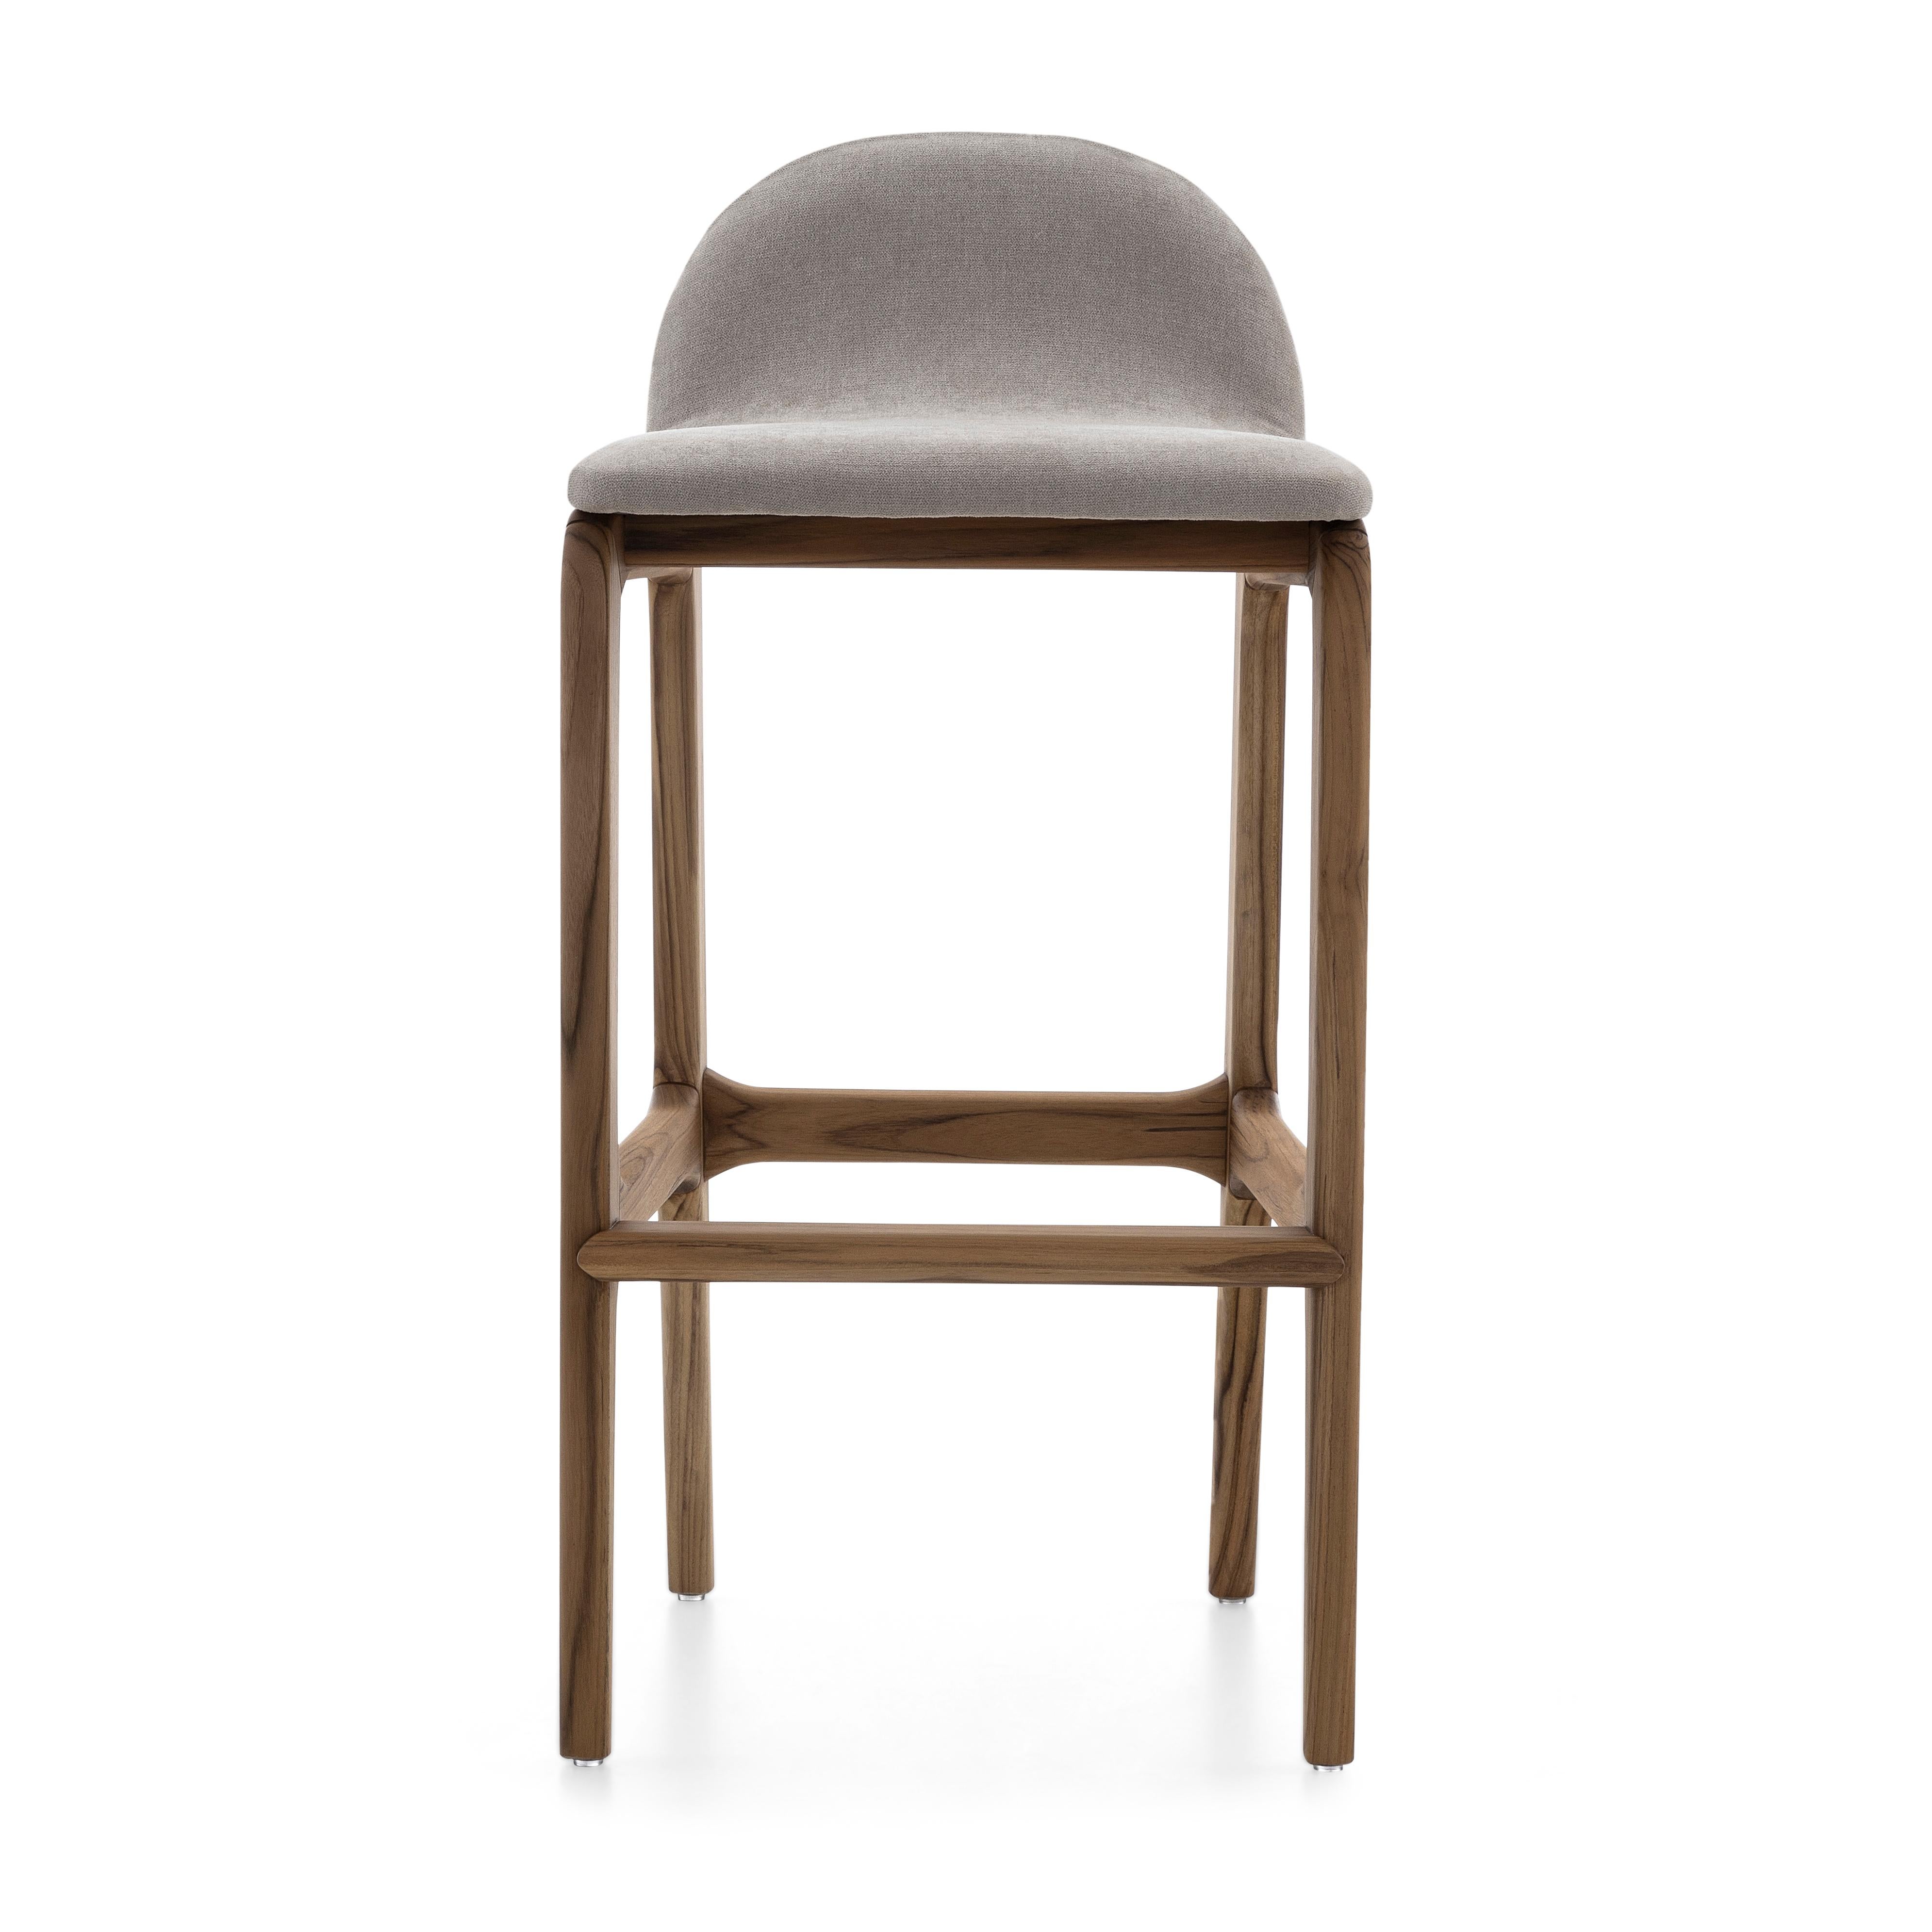 Contemporary Ura Counter Stool in Teak Wood Finish Base and Upholstered Light Grey Seat For Sale